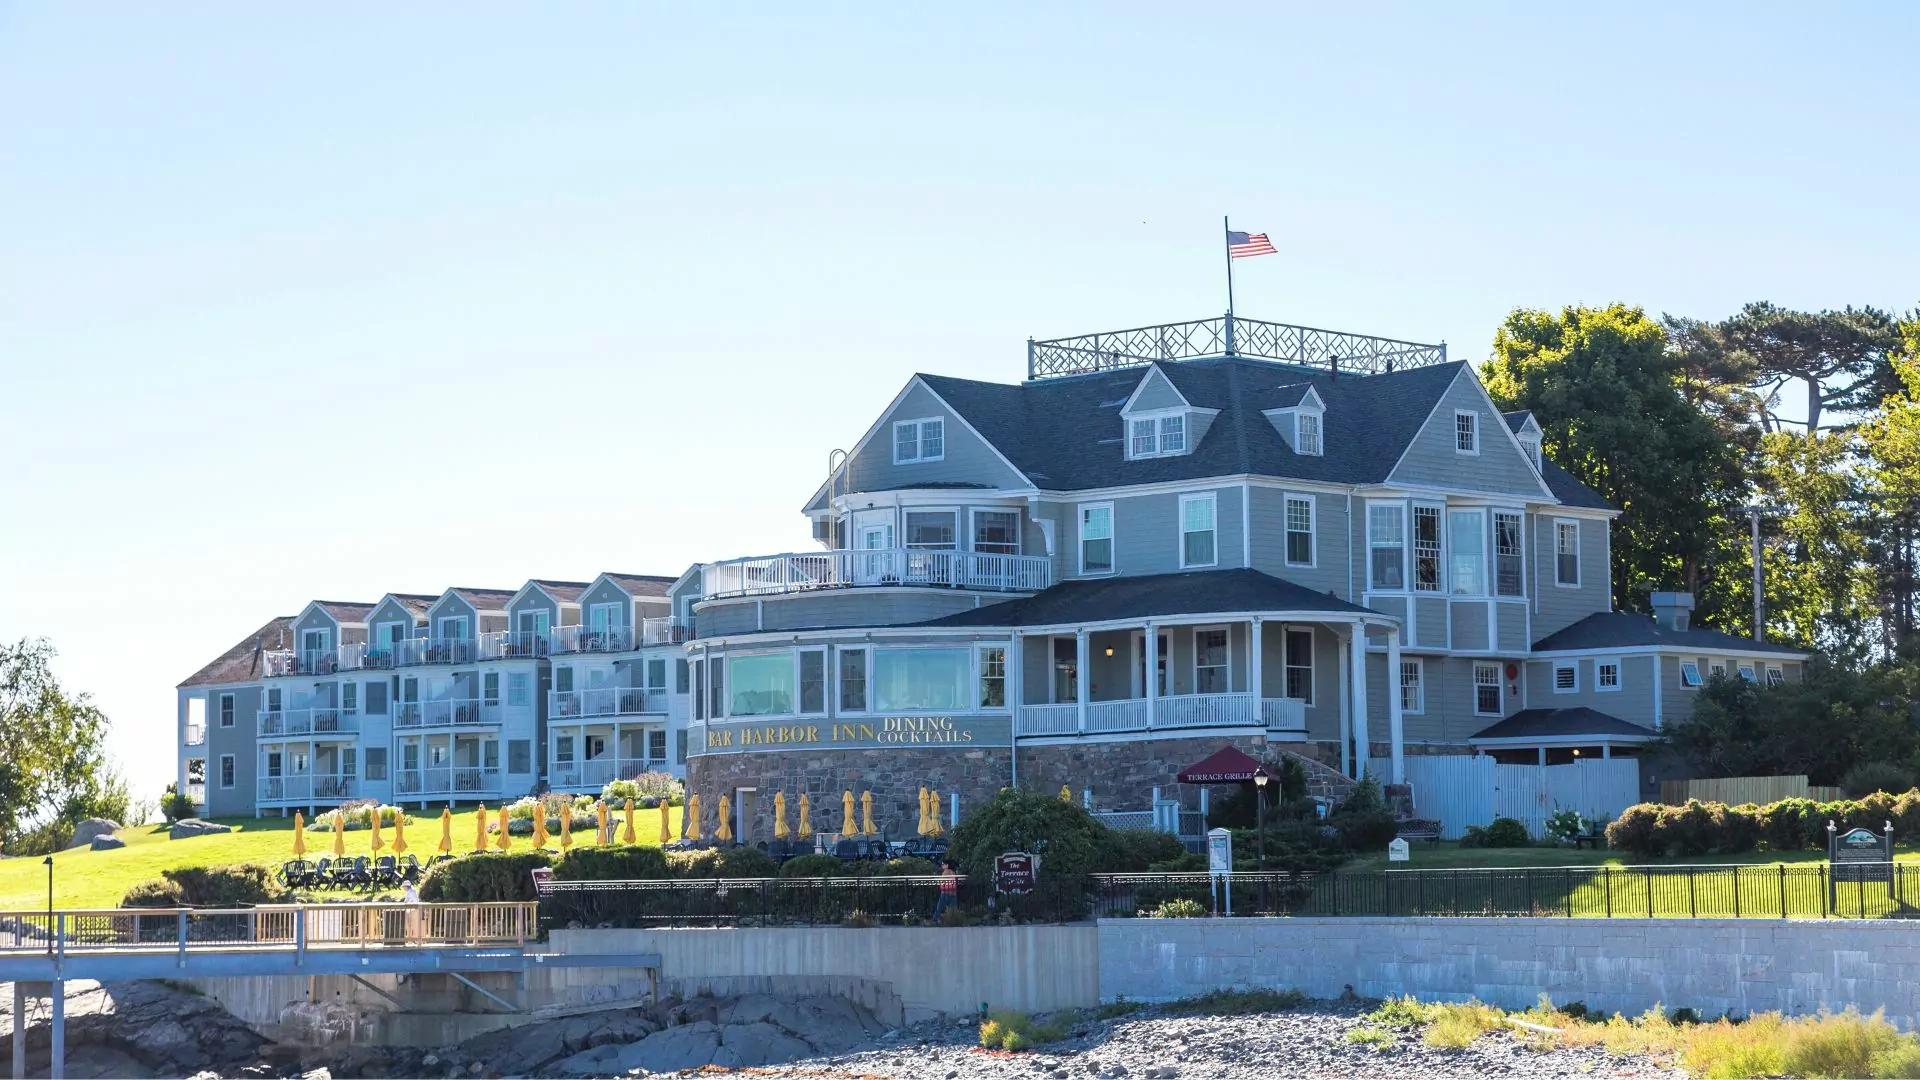 Historic Bar Harbor Inn pictured sitting on the rocky Maine coastline on a sunny day